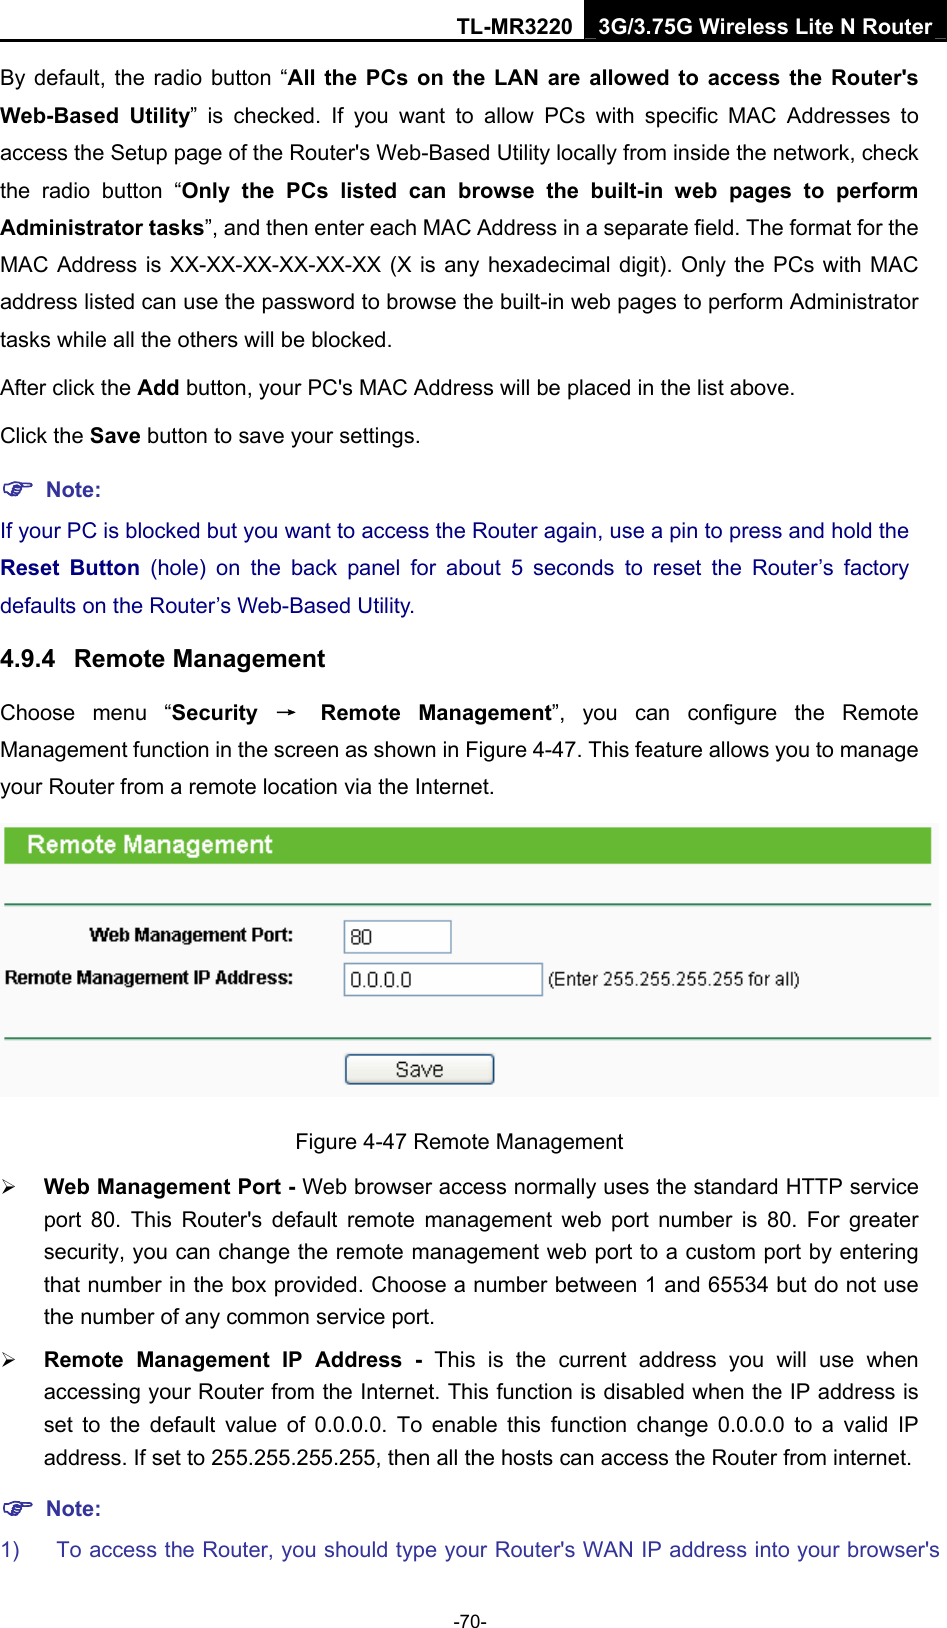 TL-MR3220 3G/3.75G Wireless Lite N Router -70- By default, the radio button “All the PCs on the LAN are allowed to access the Router&apos;s Web-Based Utility” is checked. If you want to allow PCs with specific MAC Addresses to access the Setup page of the Router&apos;s Web-Based Utility locally from inside the network, check the radio button “Only the PCs listed can browse the built-in web pages to perform Administrator tasks”, and then enter each MAC Address in a separate field. The format for the MAC Address is XX-XX-XX-XX-XX-XX (X is any hexadecimal digit). Only the PCs with MAC address listed can use the password to browse the built-in web pages to perform Administrator tasks while all the others will be blocked.   After click the Add button, your PC&apos;s MAC Address will be placed in the list above. Click the Save button to save your settings.   ) Note: If your PC is blocked but you want to access the Router again, use a pin to press and hold the Reset Button (hole) on the back panel for about 5 seconds to reset the Router’s factory defaults on the Router’s Web-Based Utility. 4.9.4  Remote Management Choose menu “Security  → Remote Management”, you can configure the Remote Management function in the screen as shown in Figure 4-47. This feature allows you to manage your Router from a remote location via the Internet.  Figure 4-47 Remote Management ¾ Web Management Port - Web browser access normally uses the standard HTTP service port 80. This Router&apos;s default remote management web port number is 80. For greater security, you can change the remote management web port to a custom port by entering that number in the box provided. Choose a number between 1 and 65534 but do not use the number of any common service port.   ¾ Remote Management IP Address - This is the current address you will use when accessing your Router from the Internet. This function is disabled when the IP address is set to the default value of 0.0.0.0. To enable this function change 0.0.0.0 to a valid IP address. If set to 255.255.255.255, then all the hosts can access the Router from internet.   ) Note: 1)  To access the Router, you should type your Router&apos;s WAN IP address into your browser&apos;s 